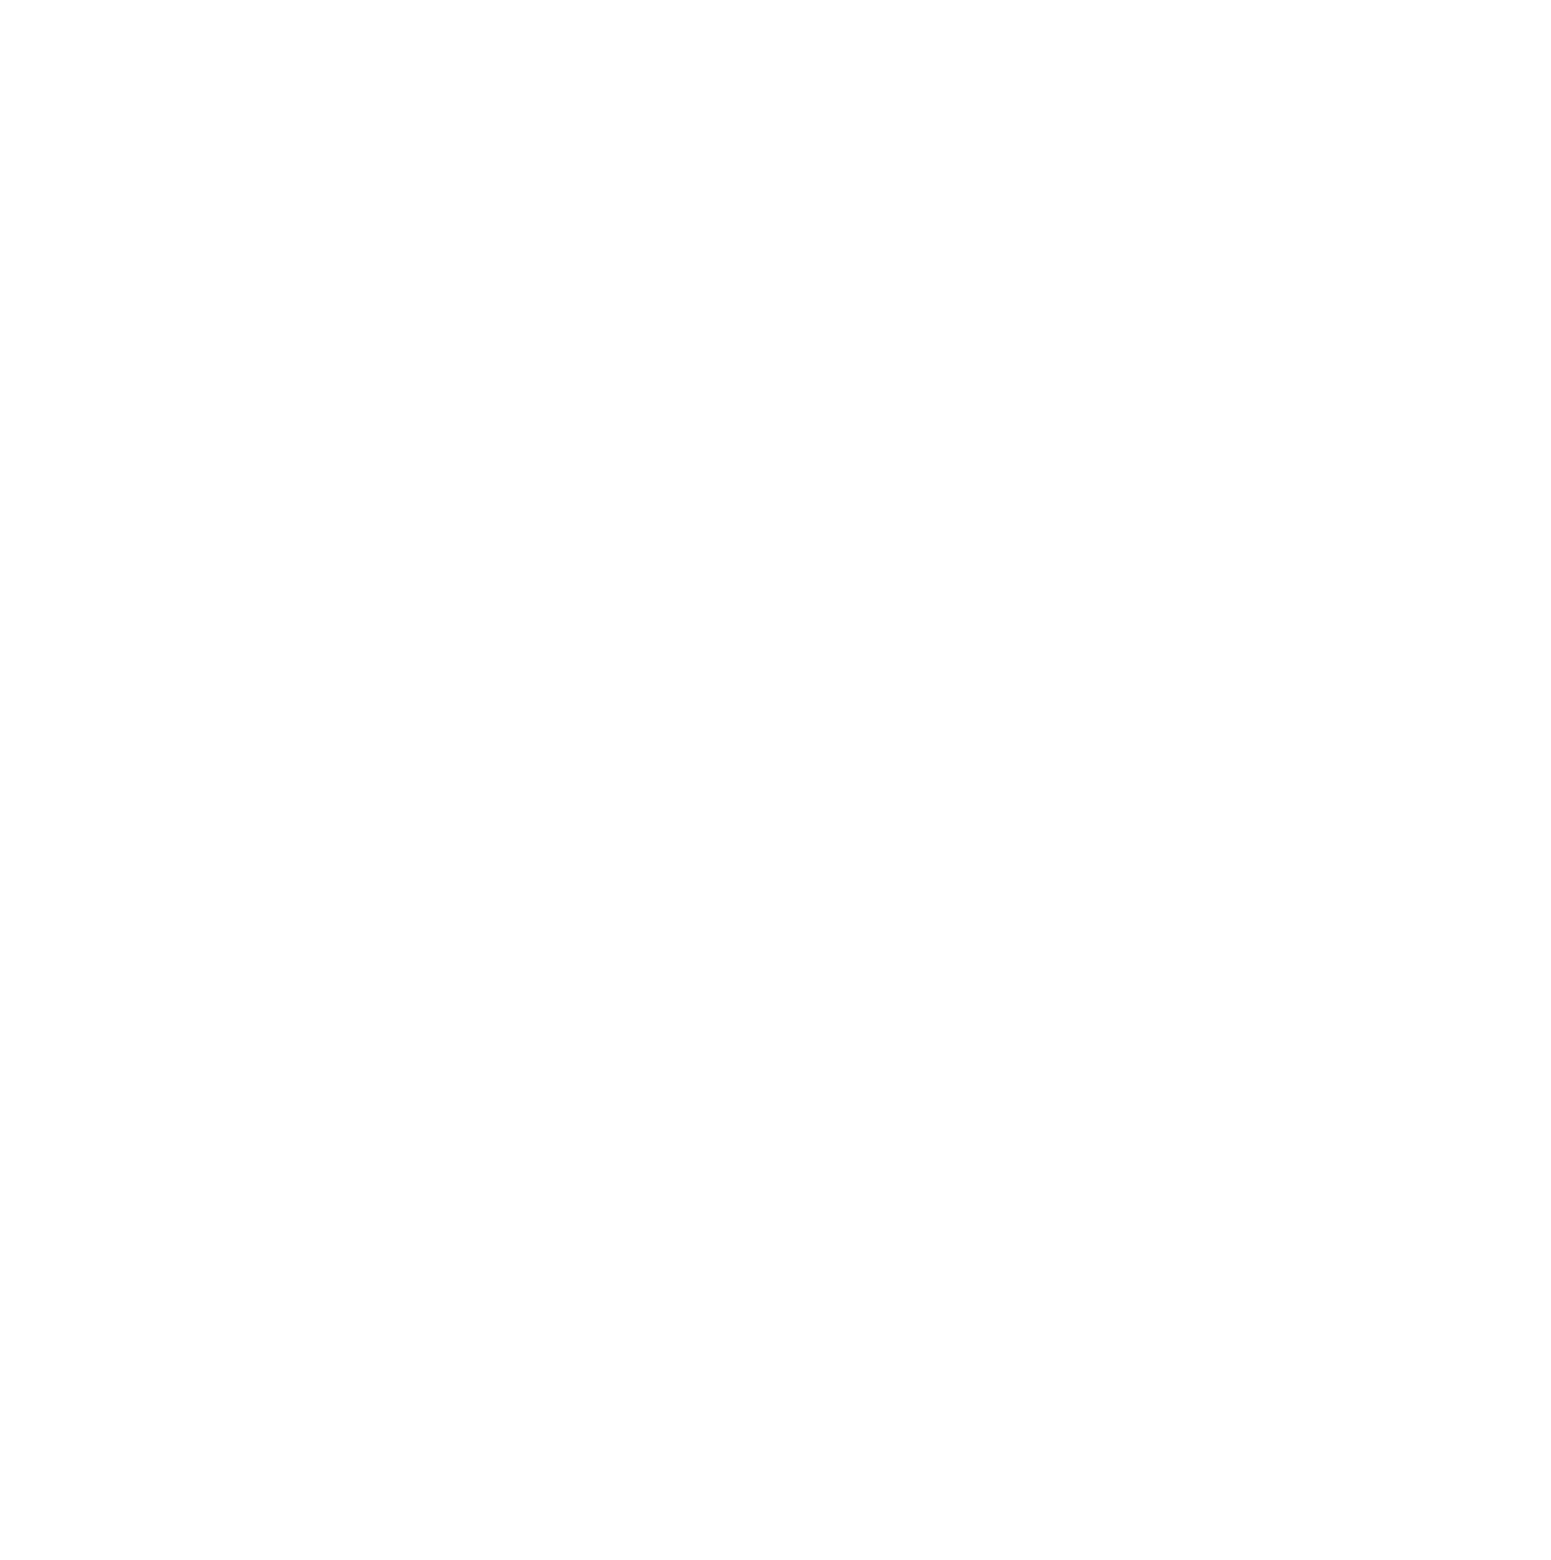 C&F Financial Corporation logo in transparent PNG and vectorized SVG formats